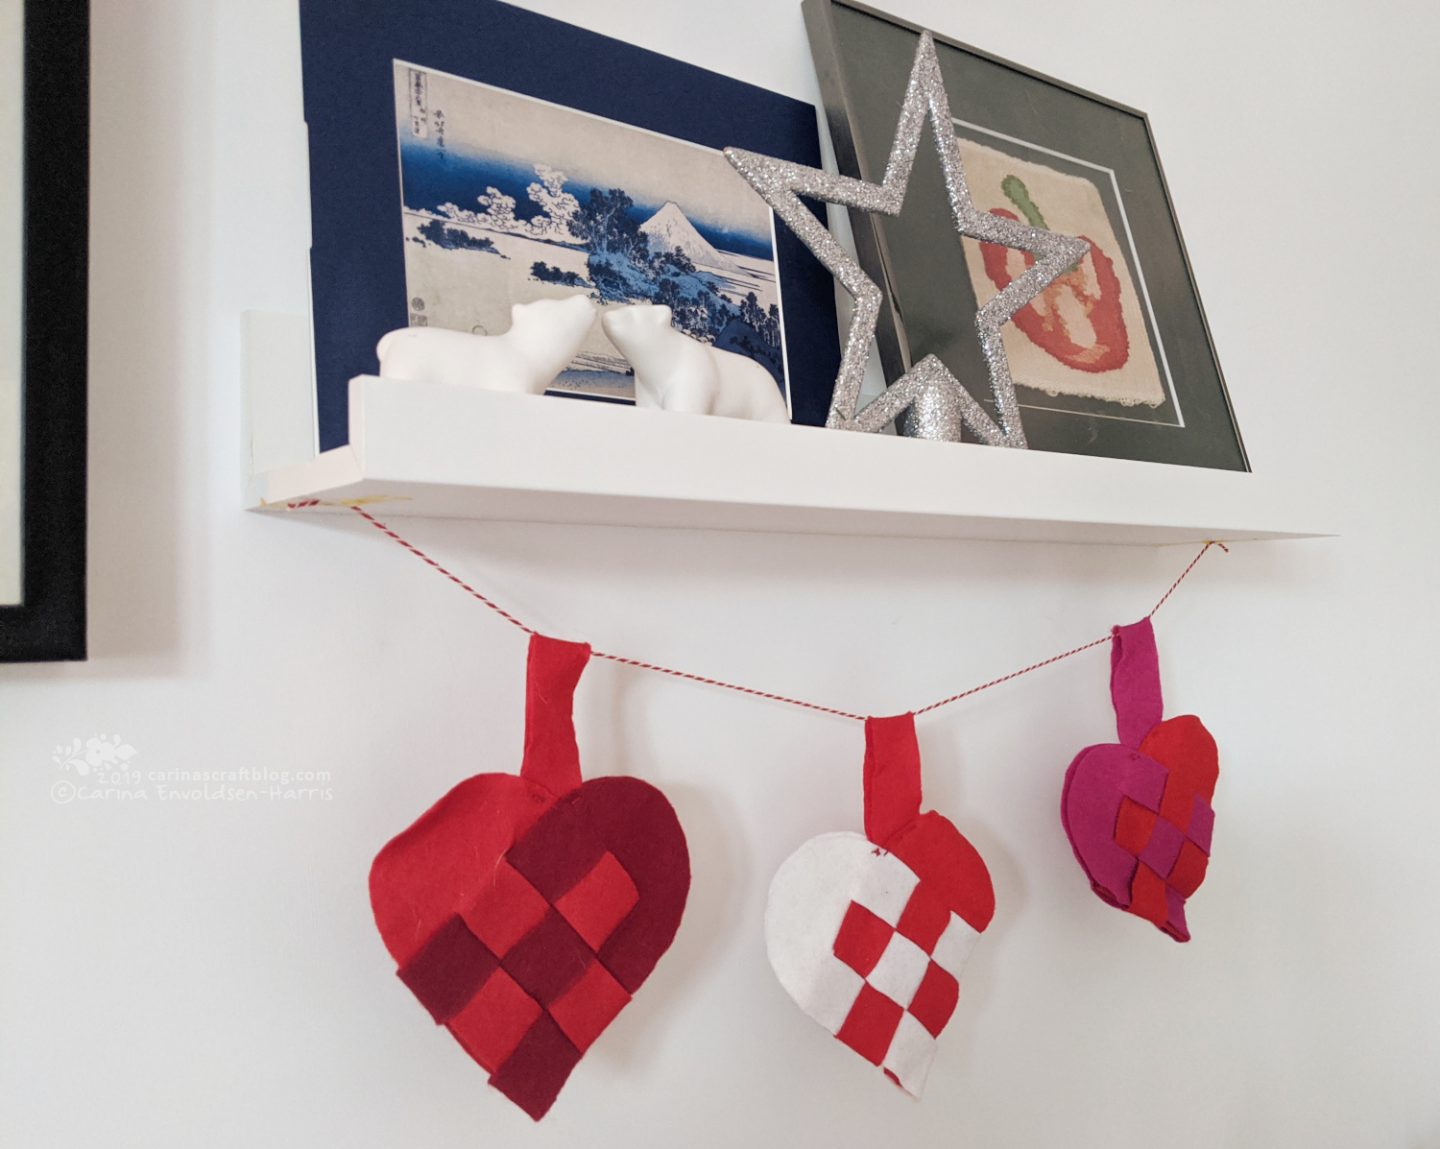 Picture shelf with pictures and polar bear ornaments. Felt woven hearts hanging from the shelf.